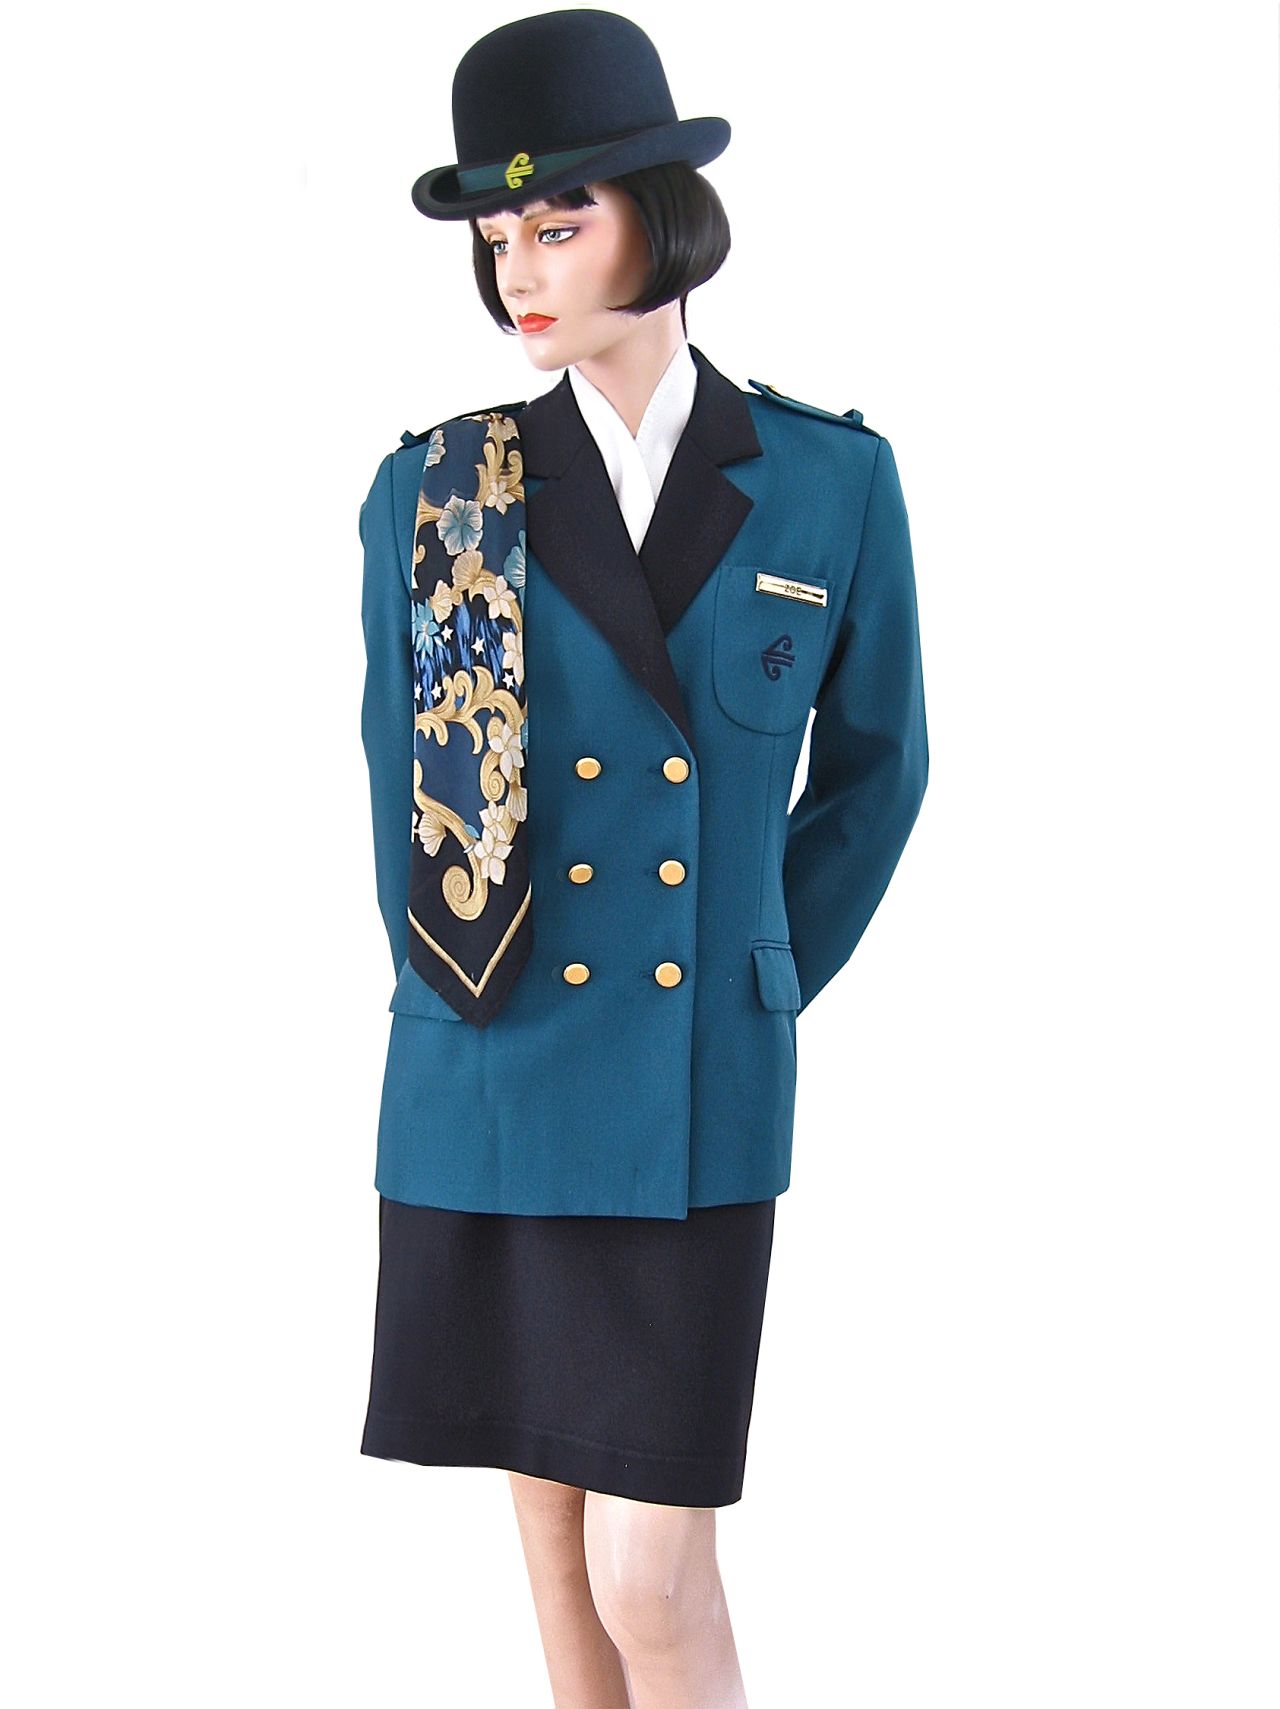 Muskiet has been collecting uniforms for over 30 years. His first uniform was given to him as a child by his mother's friend, who was a stewardess. This piece is an old Air New Zealand uniform. 